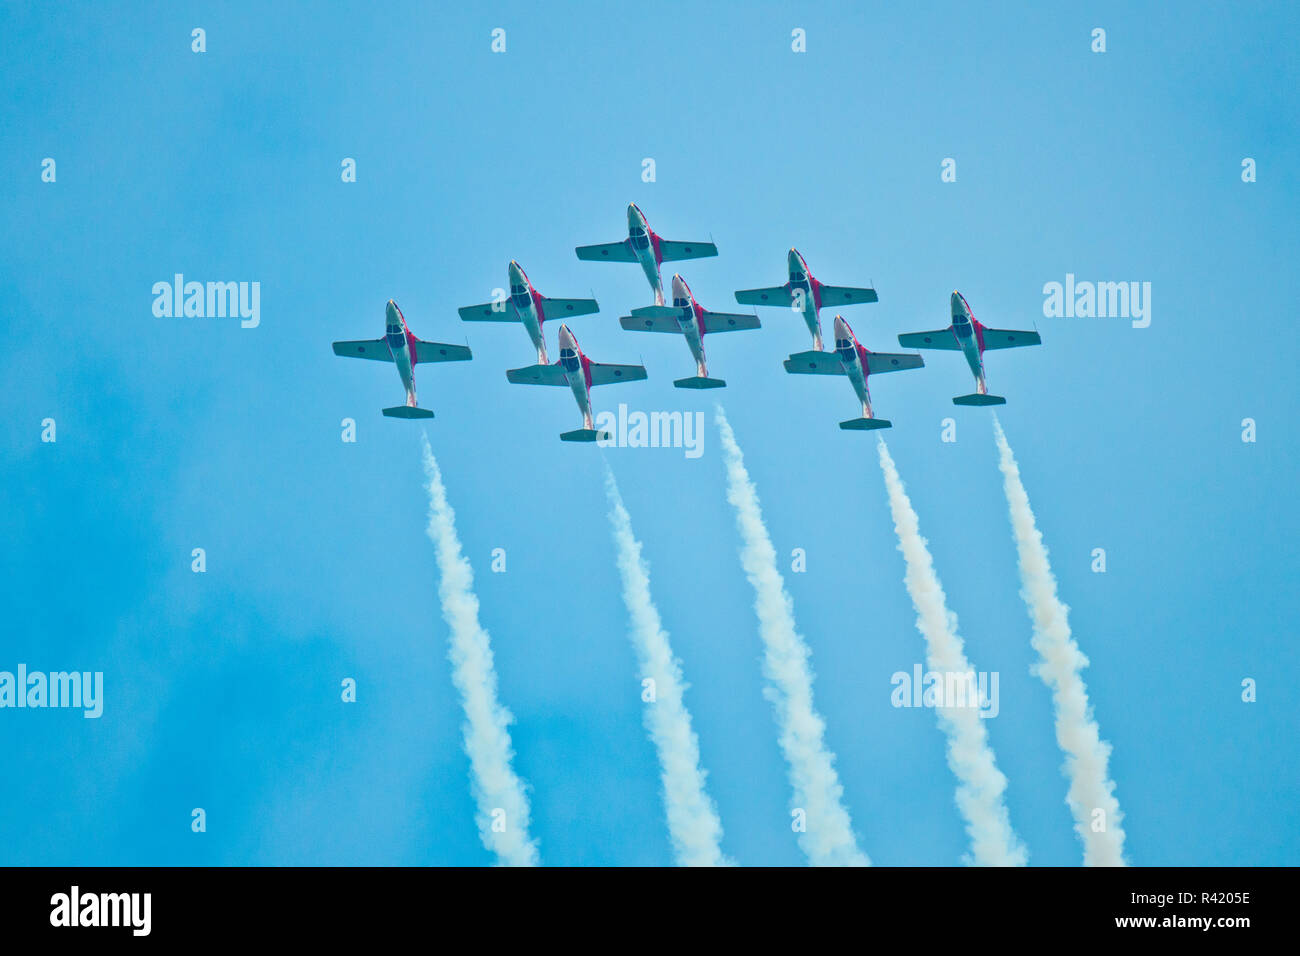 USA, Wisconsin, Oshkosh, AirVenture 2016, Canadian Air Force Snowbirds Aerobatic Team Aircraft flying Canadair CT-114 Tudor Jets formation Pattern Stock Photo